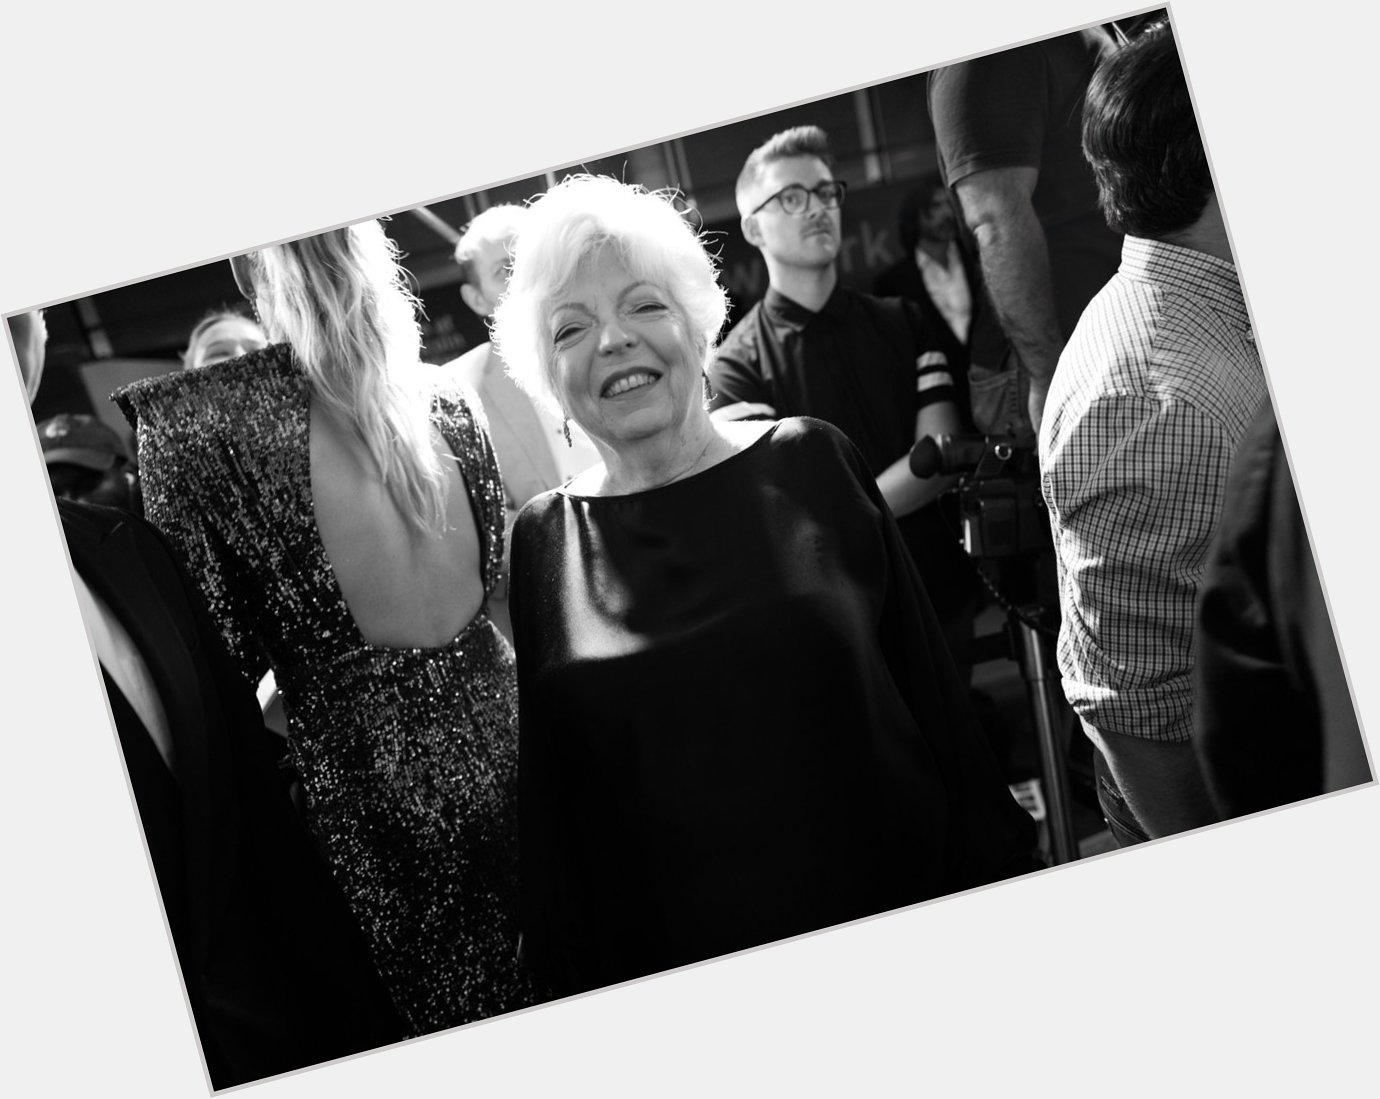 Happy birthday to the supreme Thelma Schoonmaker! : Greg Williams at the NYFF premiere of 